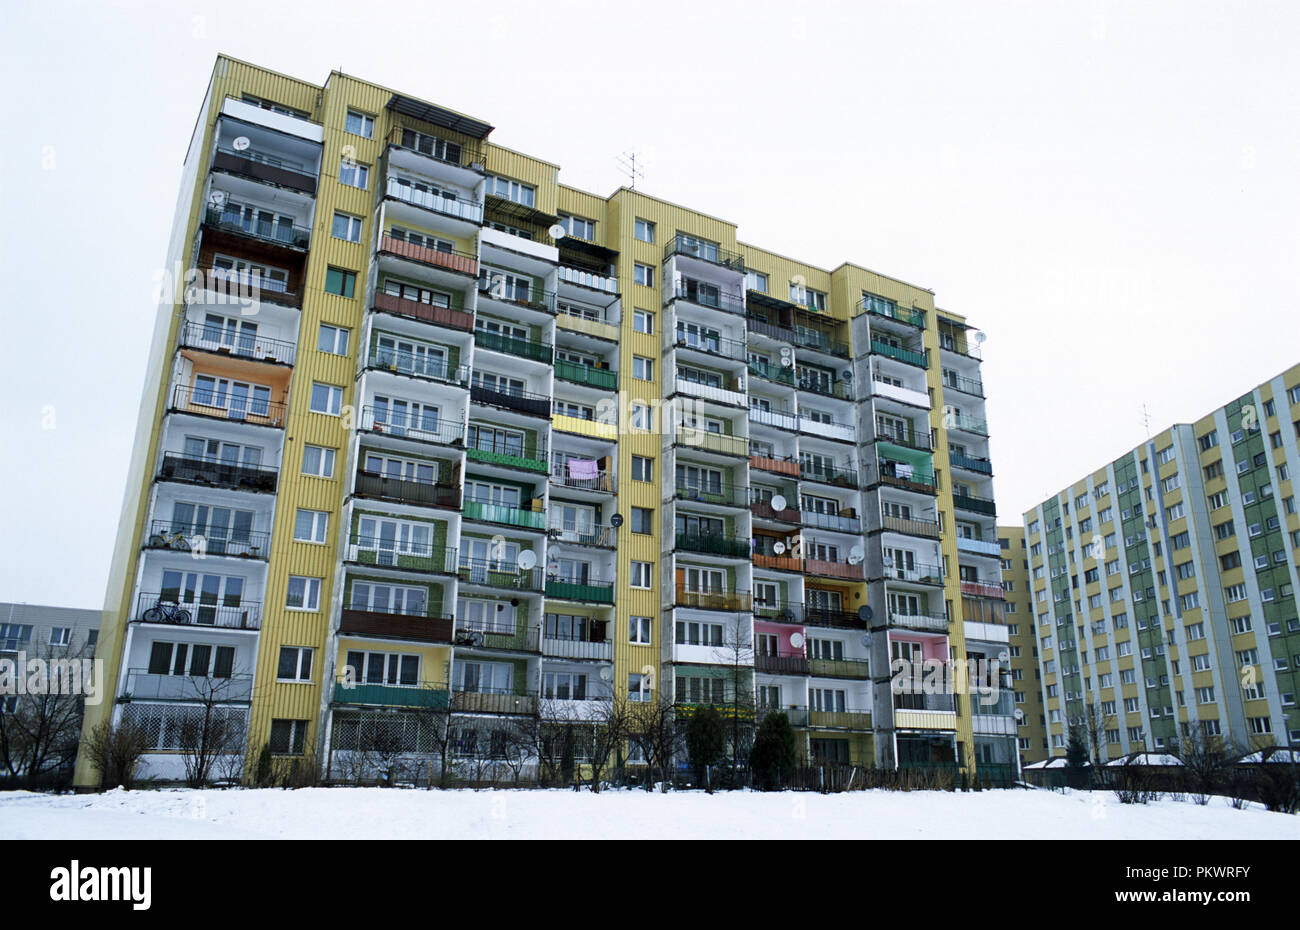 Soviet era residential housing block in the town of Wolomin in the eastern outskirts of Warsaw. Feb 2007 Stock Photo